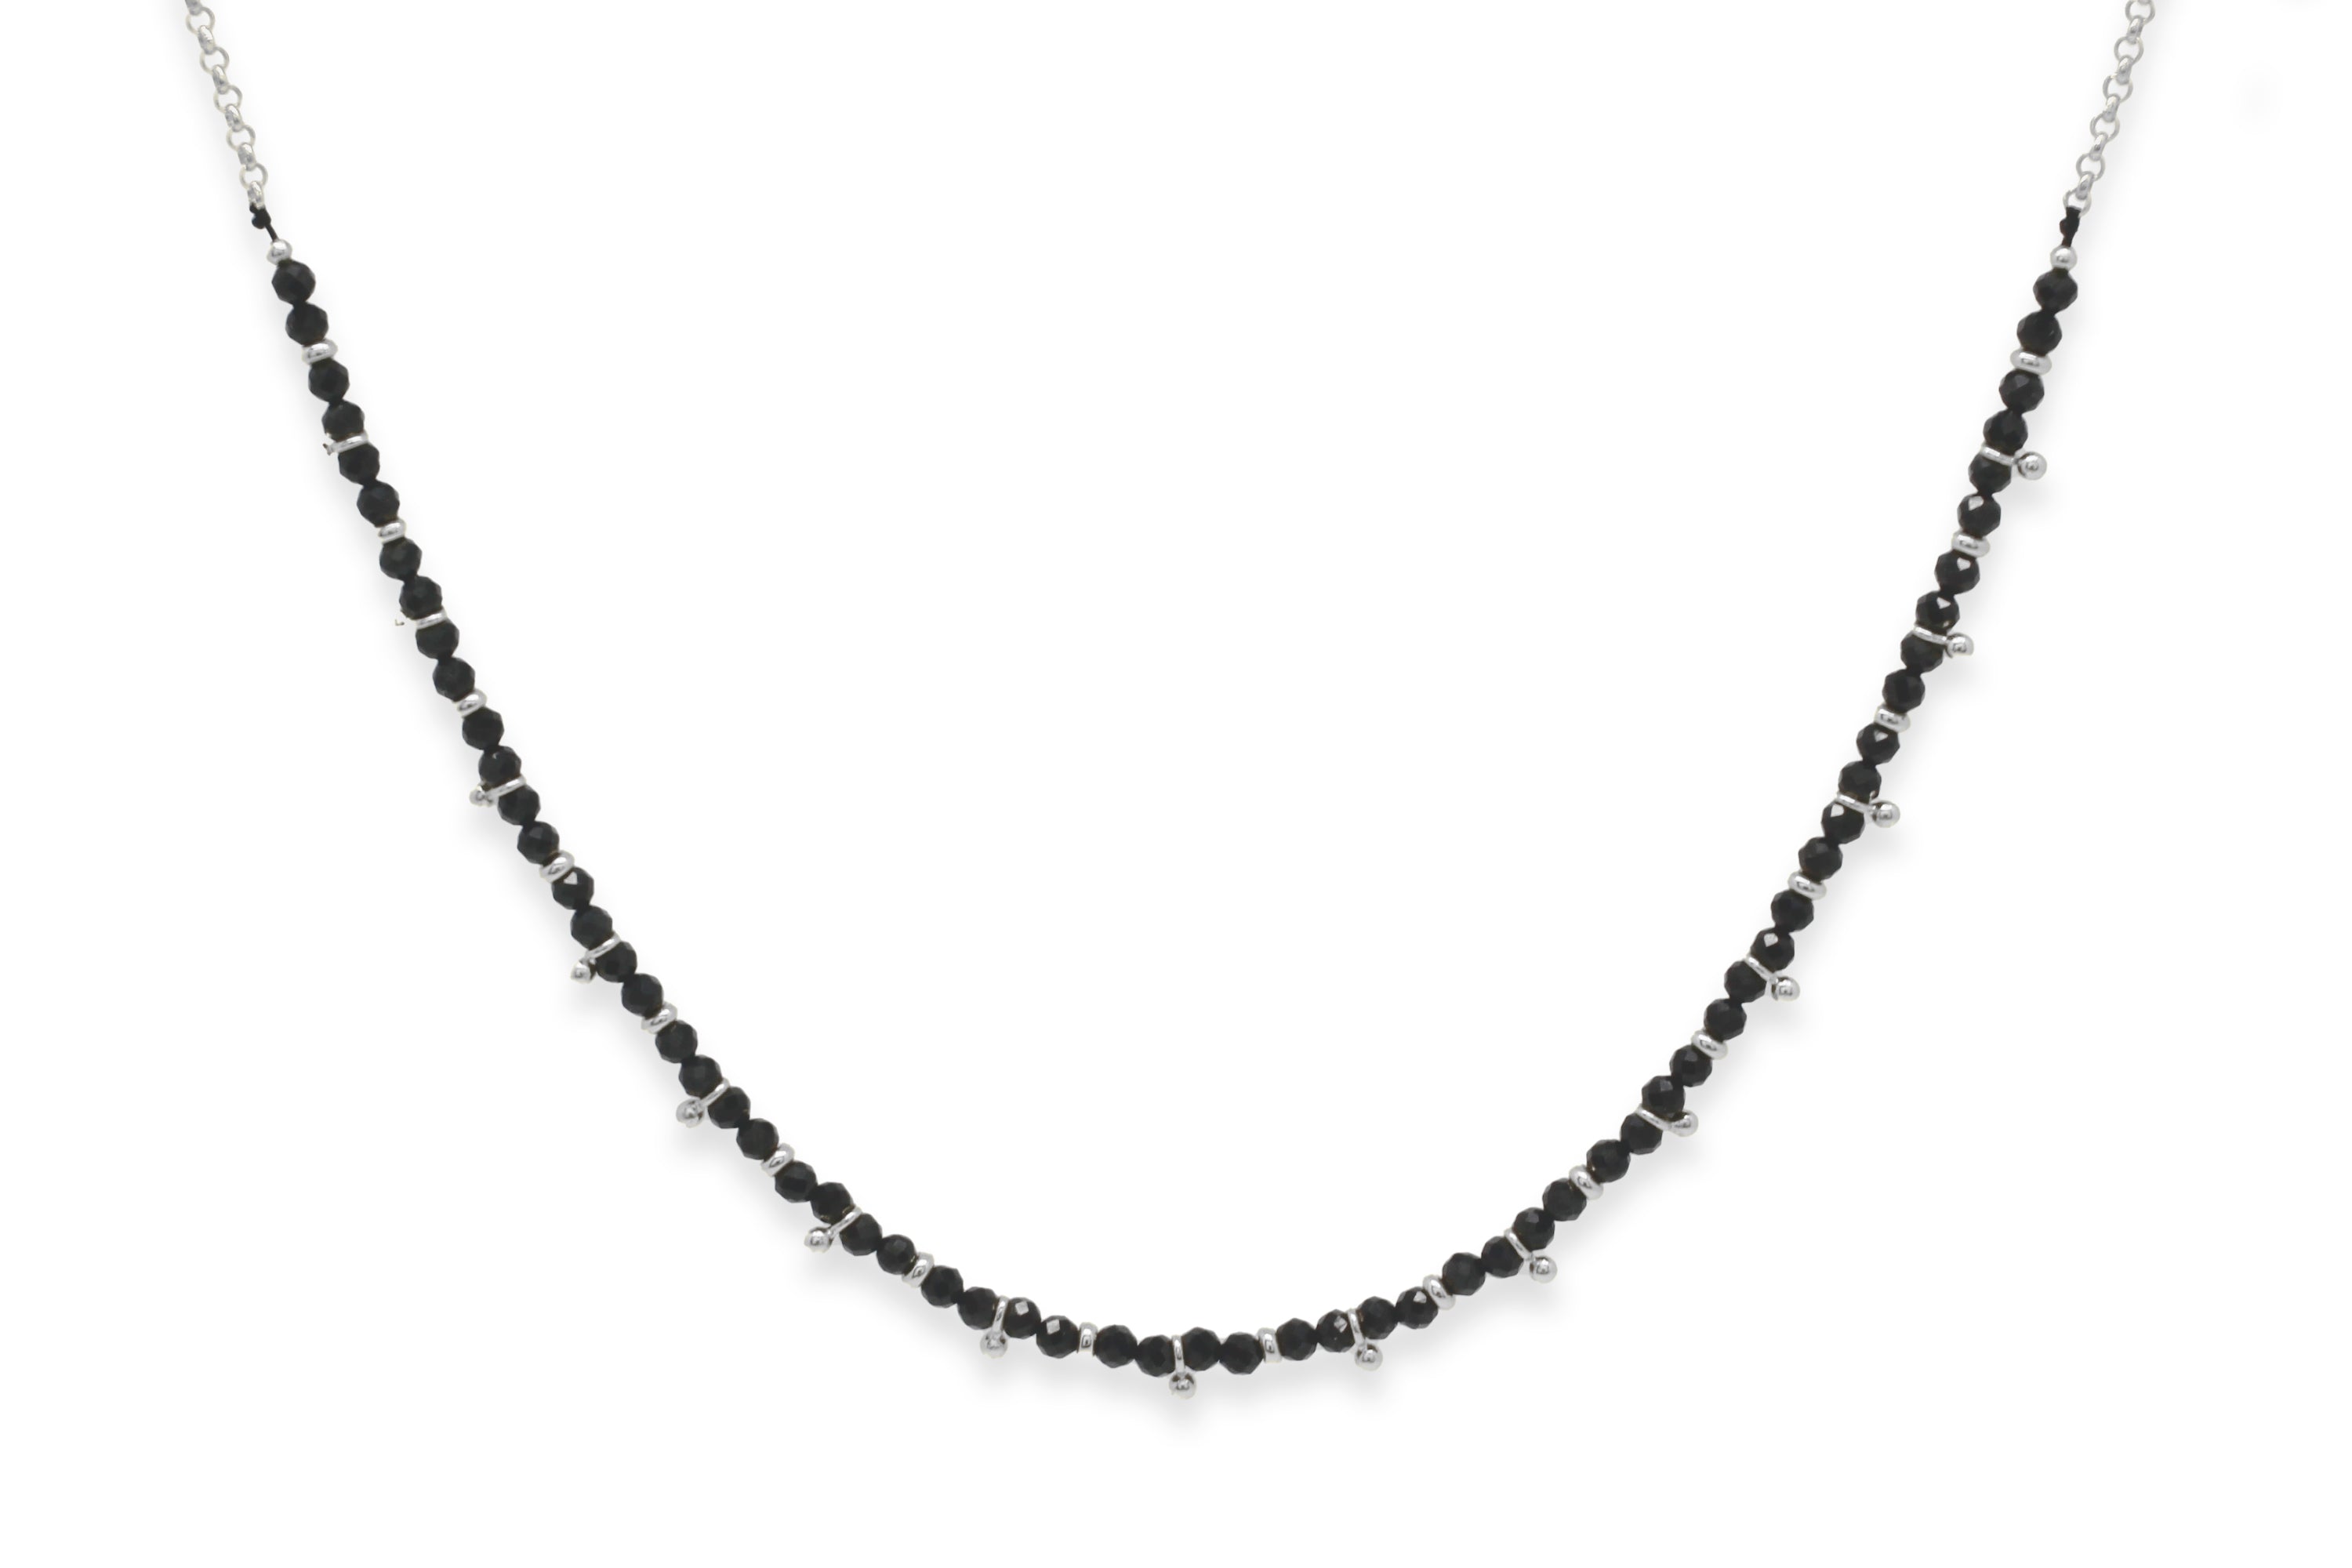 18 inch Black Spinel Necklace with Pave Diamond Clasp - Susan Standeffer  Designs